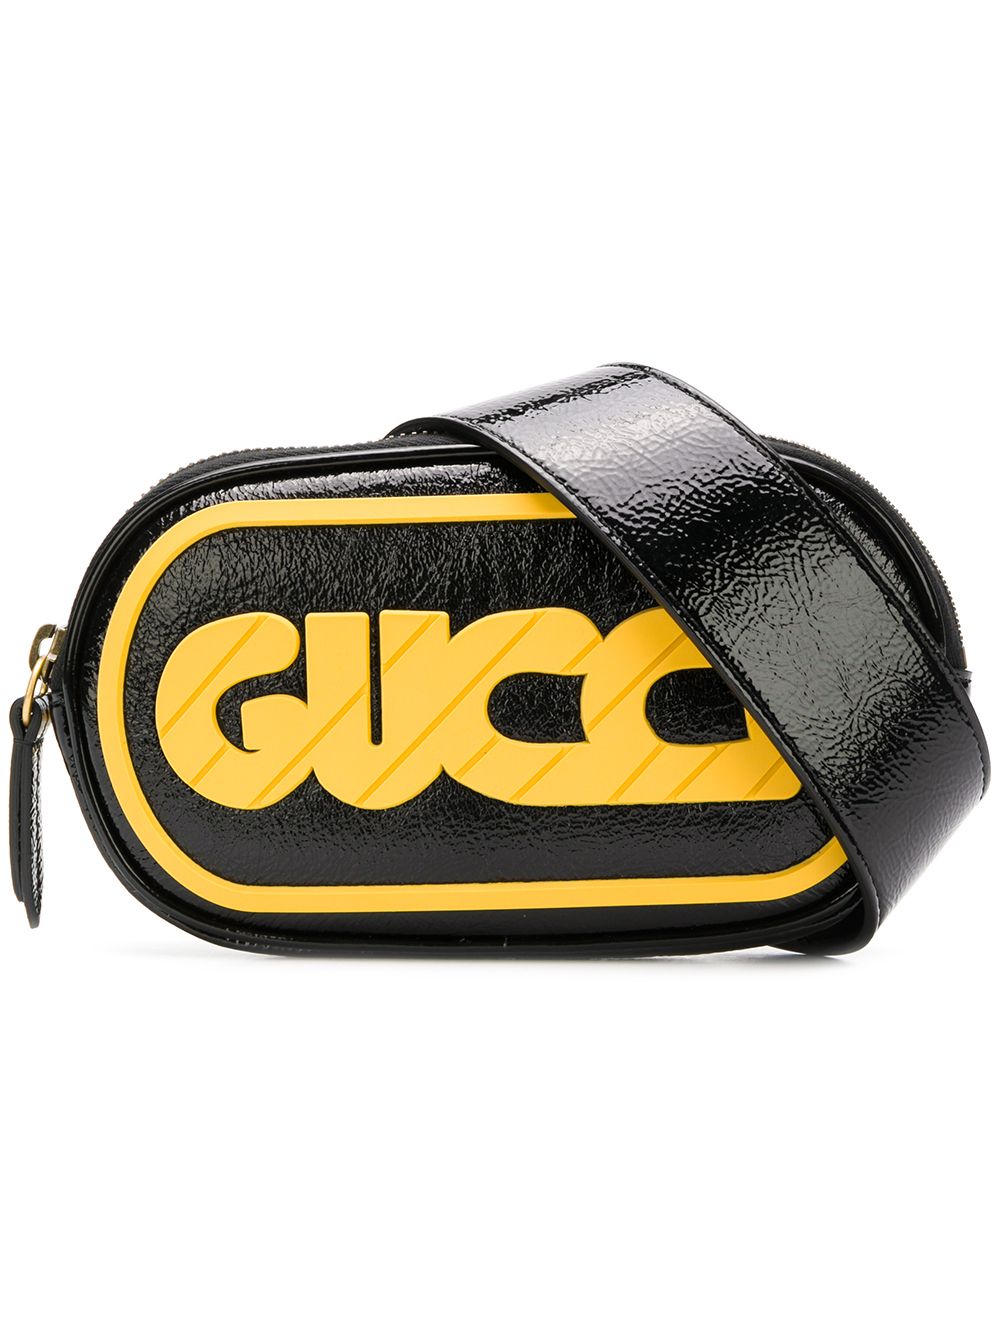 yellow gucci fanny pack